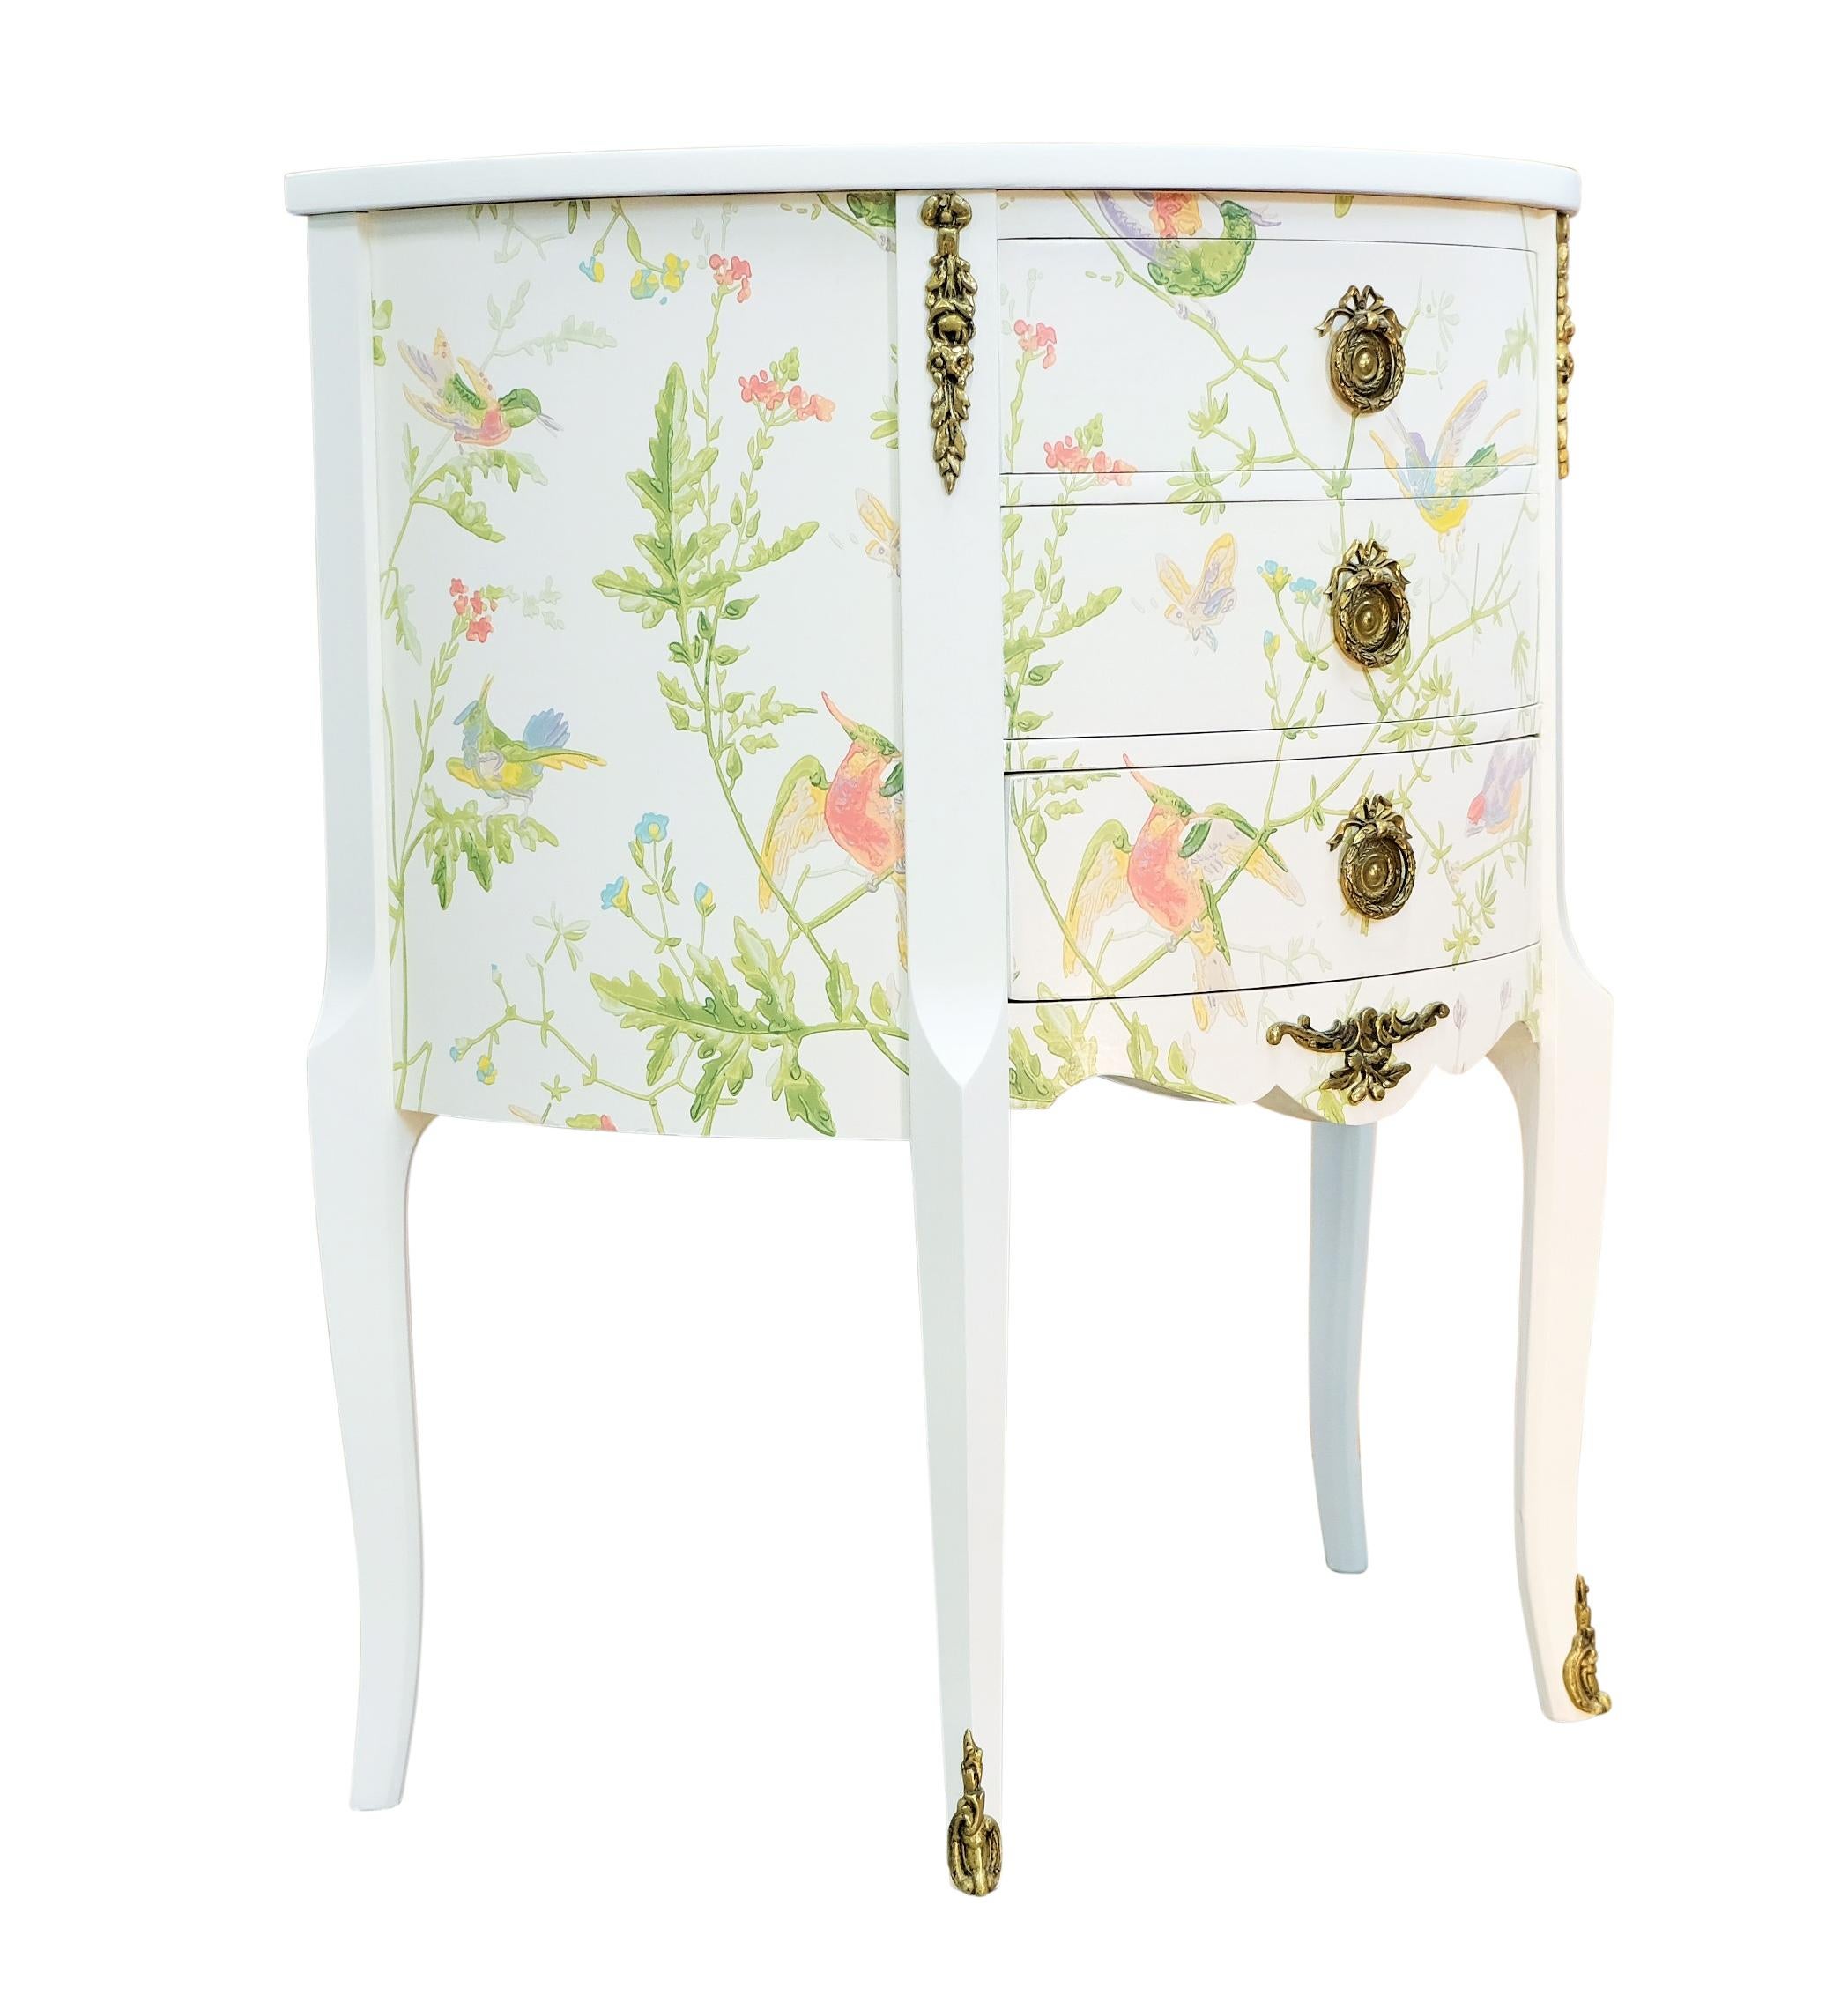 Gustavian chest with marble slab and frame in white, redesigned with hummingbird design pattern. Marble top. Fine original fittings in solid brass. 

Width: 68cm / 26.8